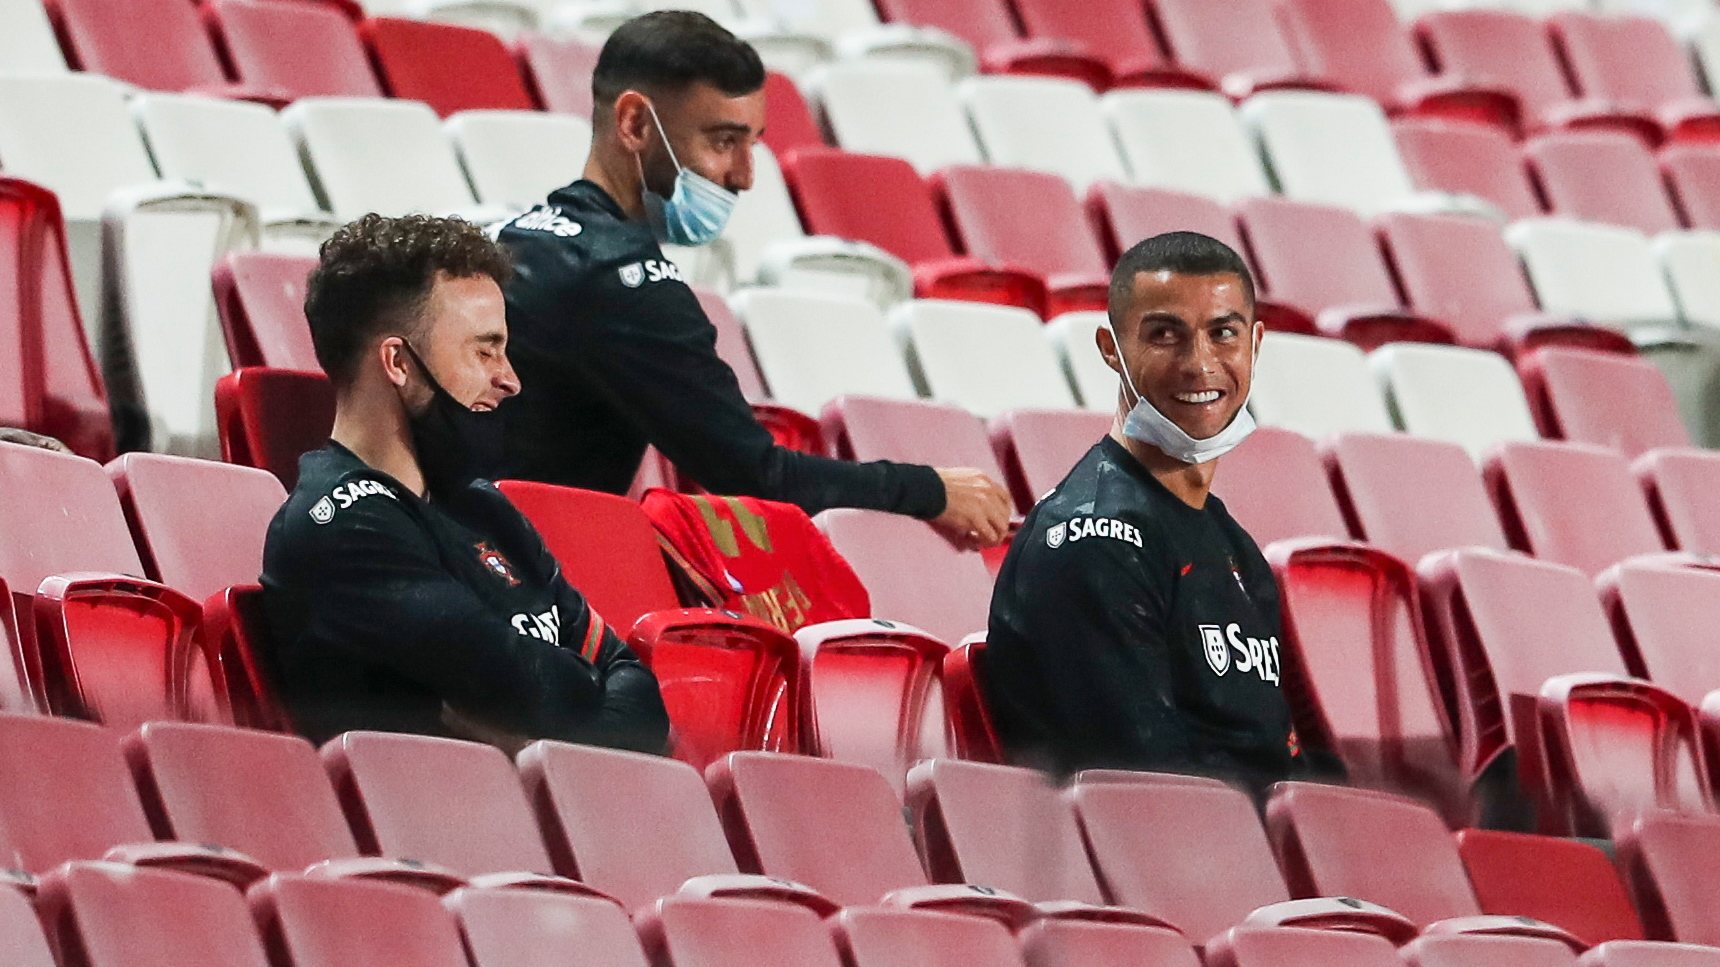 epa08814762 Portugal national team players Cristiano Ronaldo (R), Diogo Jota and Bruno Fernandes laugh in the stands prior to the friendly soccer match between Portugal and Andorra, held at Luz stadium in Lisbon, Portugal, 11 November 2020.  EPA/JOSE SENA GOULAO